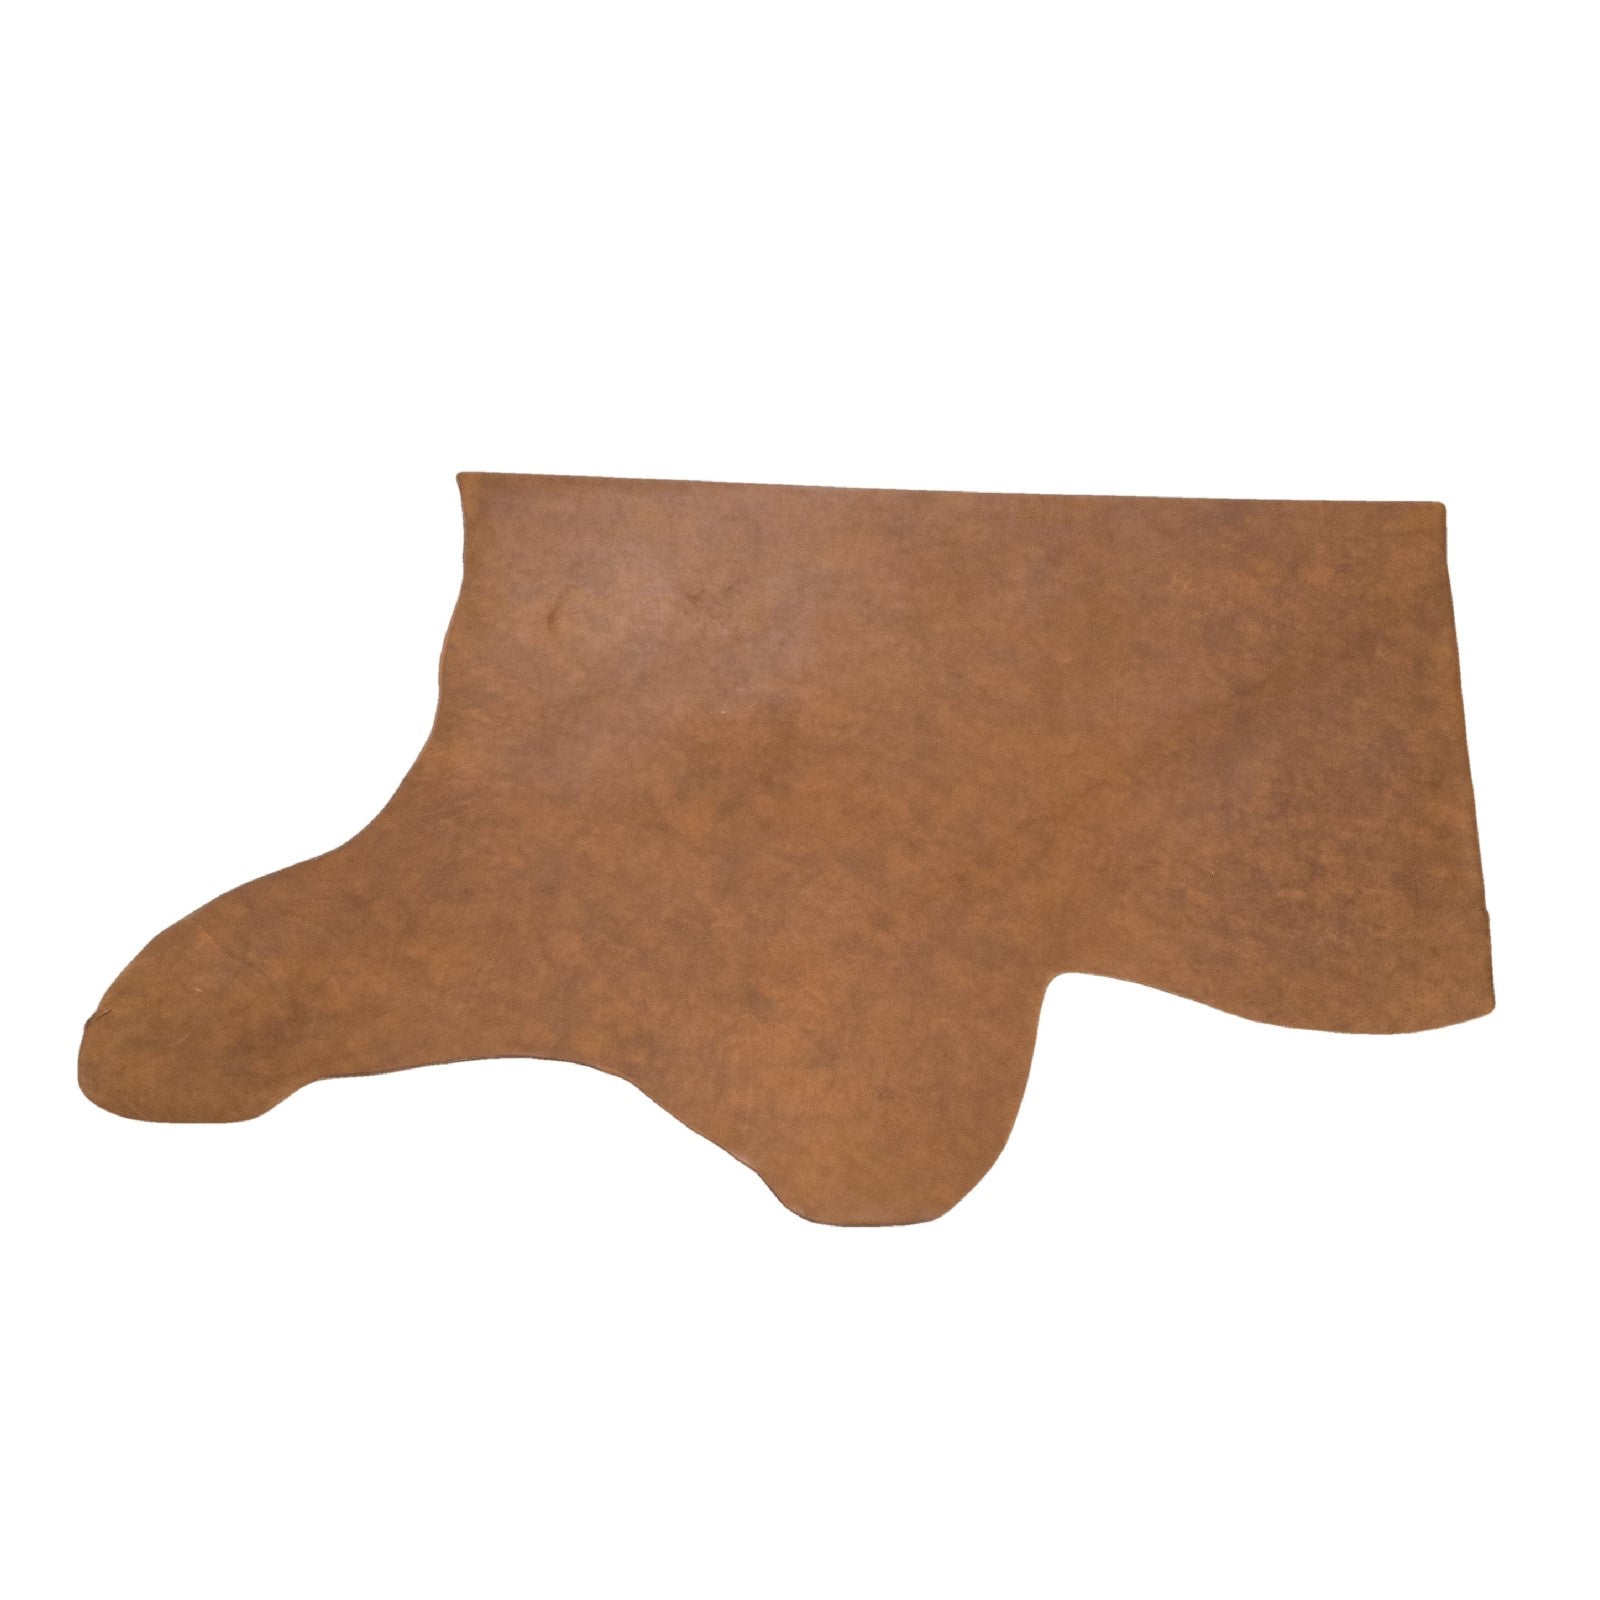 Distressed Sierra Redwood Oil Tanned Summits Edge Sides & Pieces, Bottom Piece / 6.5 - 7.5 Square Foot | The Leather Guy